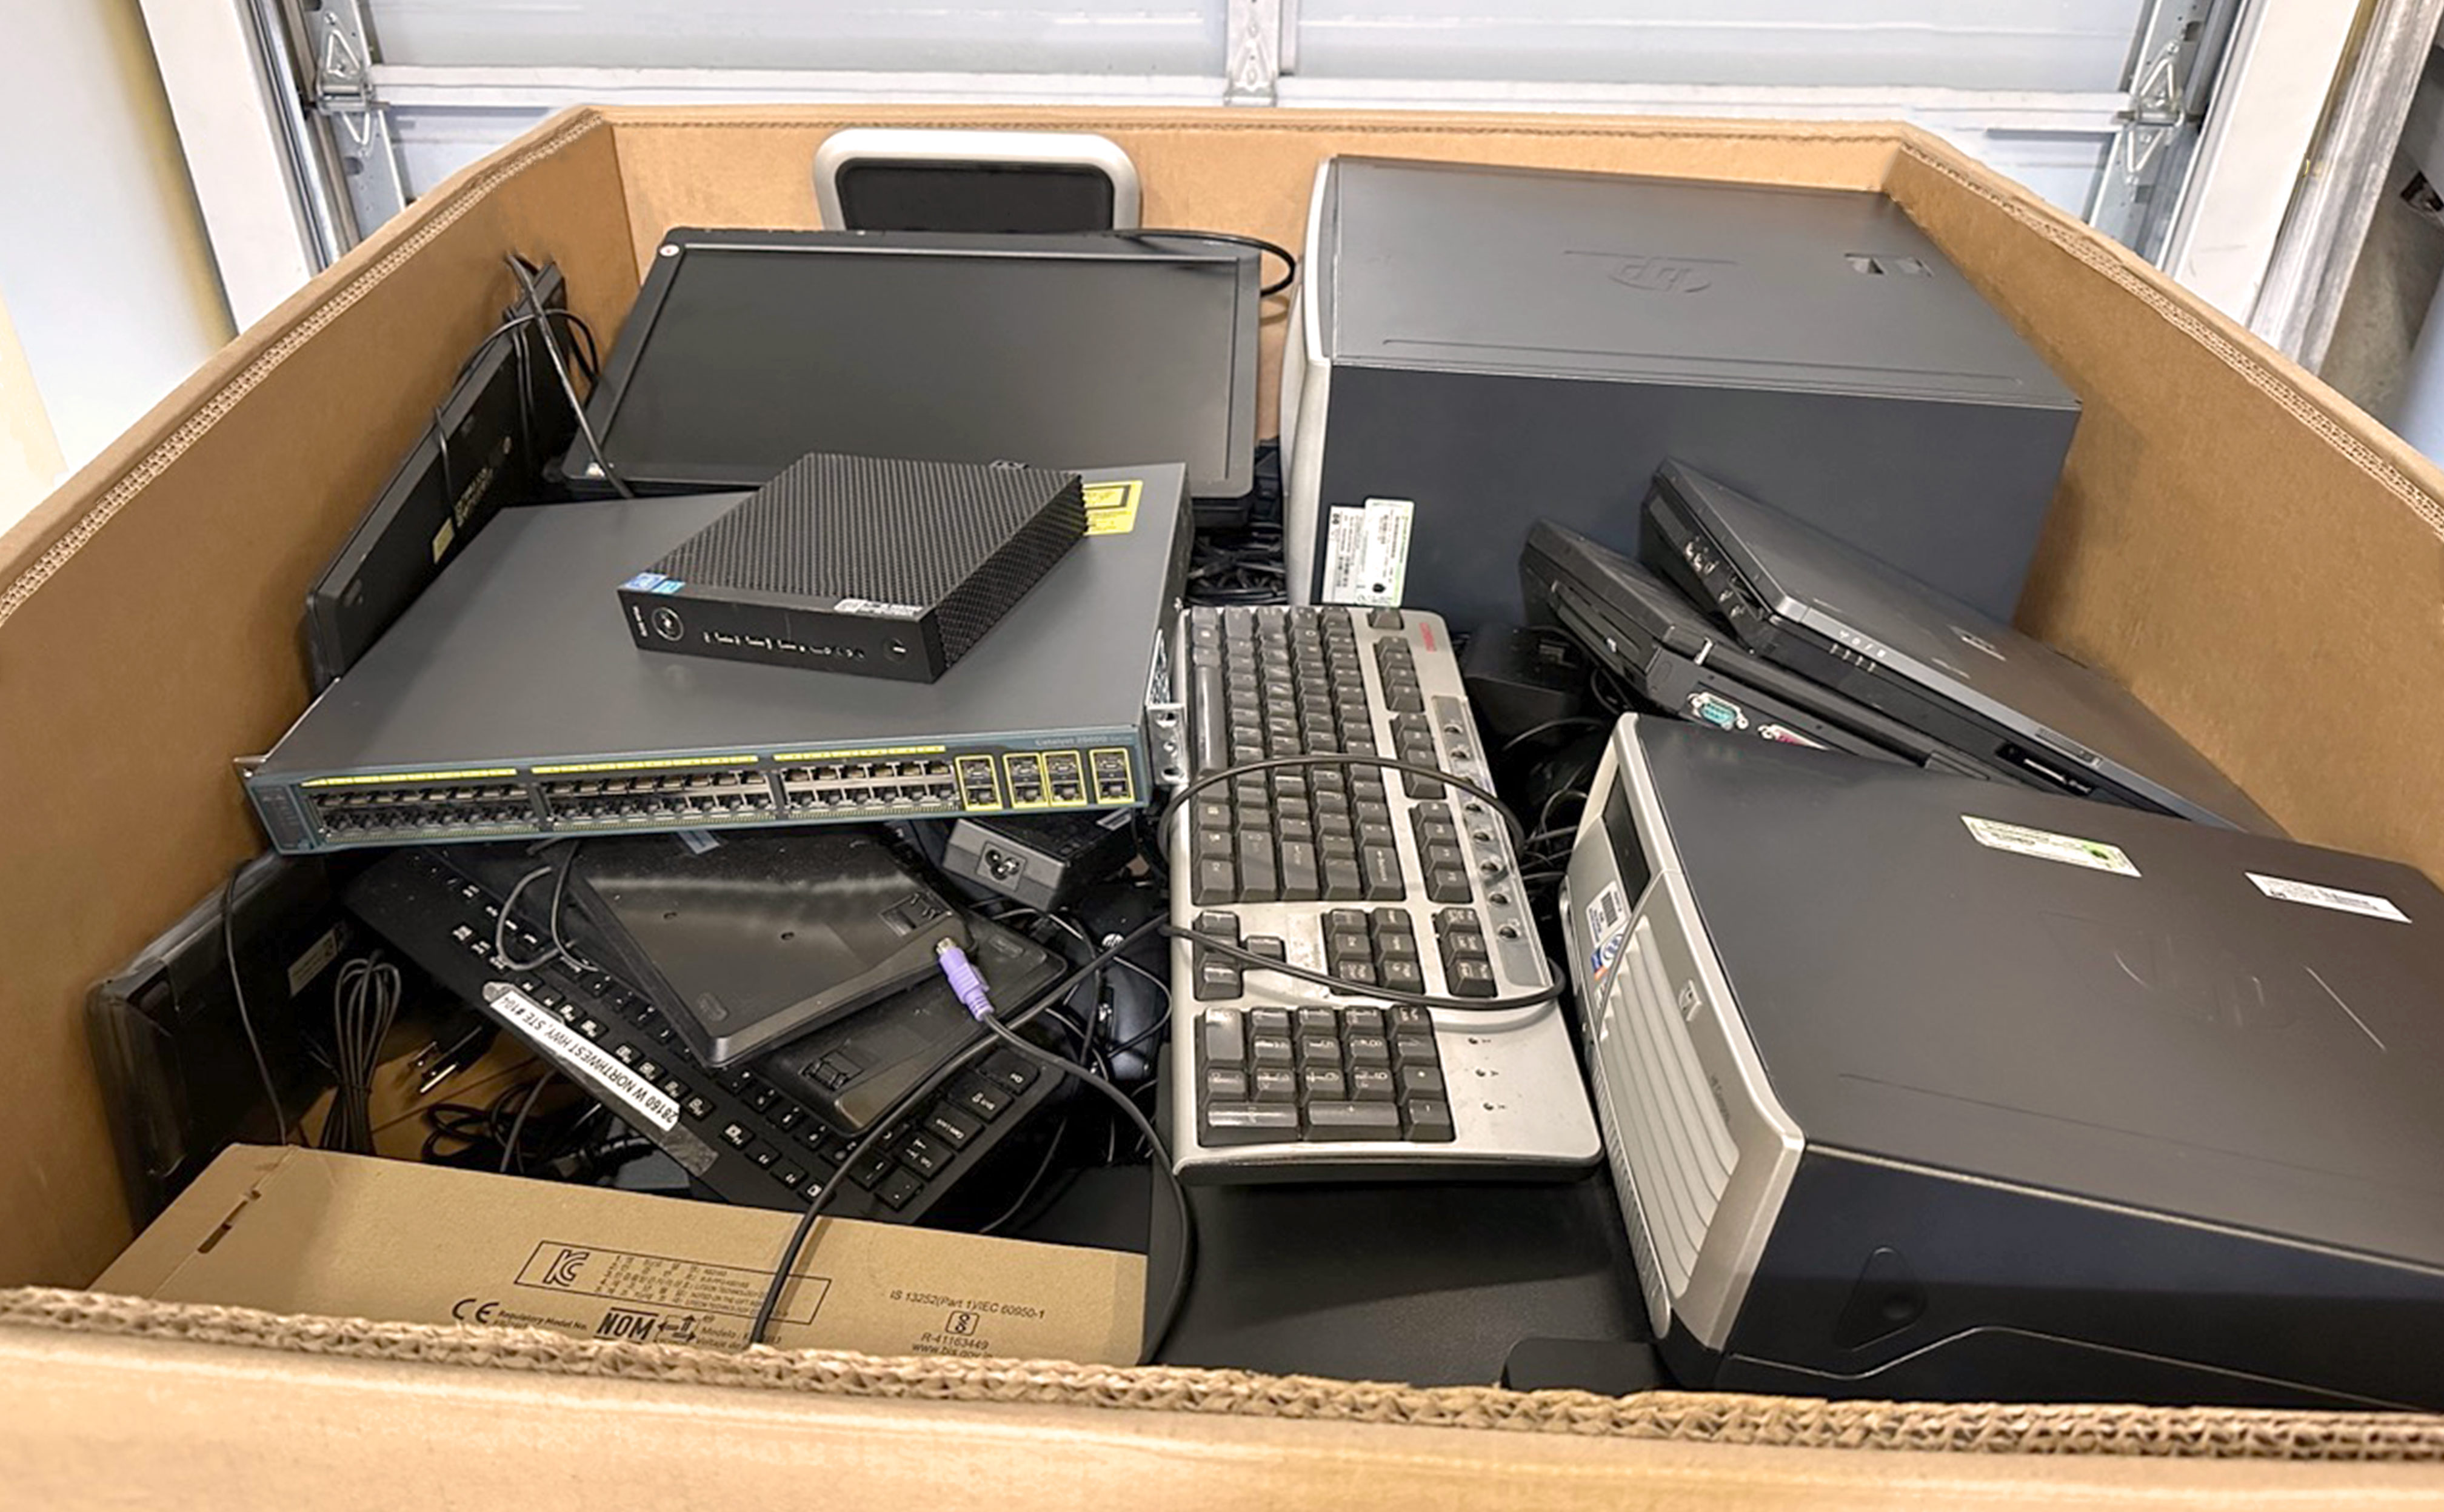 800 pound electronics recycle box detail view - open top box fully loaded with a large variety of office electronics sitting near a closed garage door